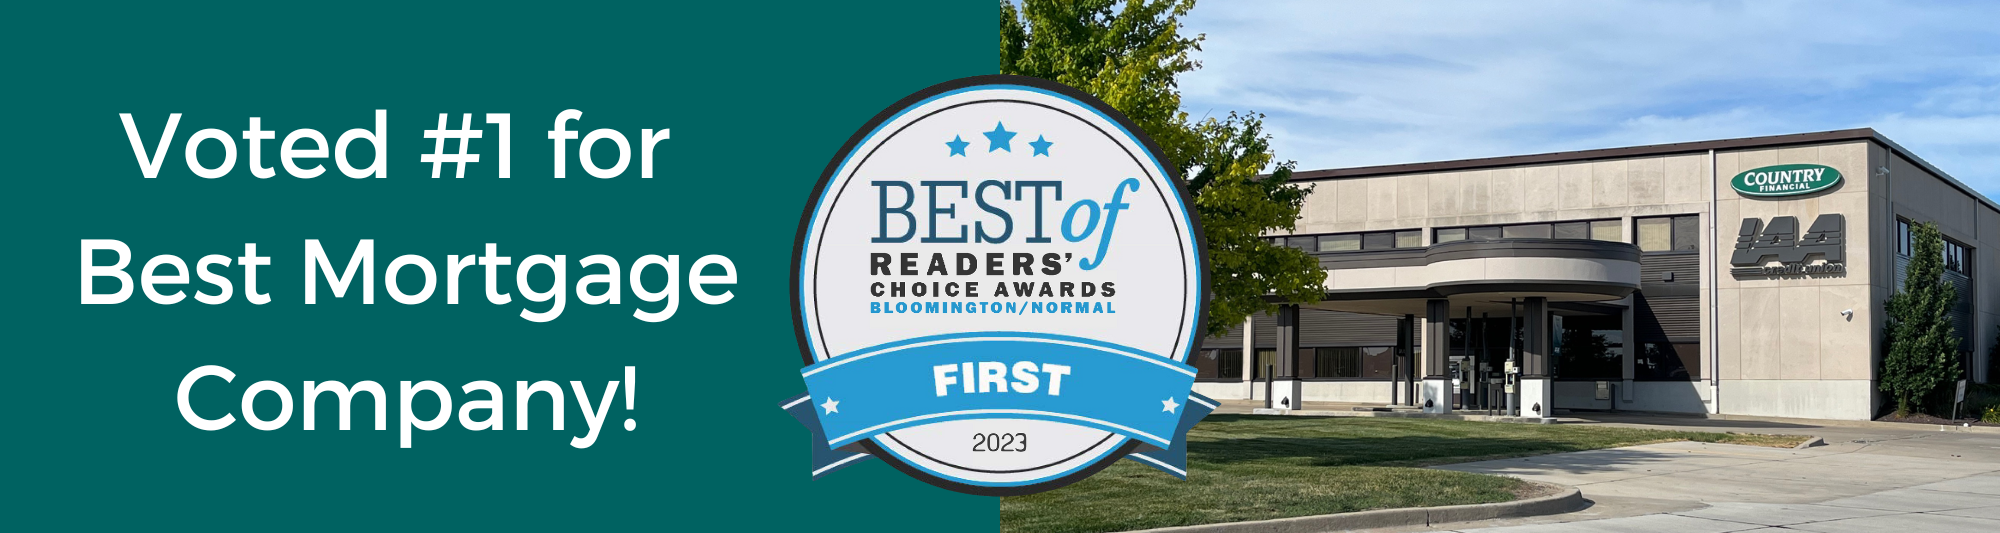 Voted #1 for best mortgage company! Best of Readers' Choice Award 2023